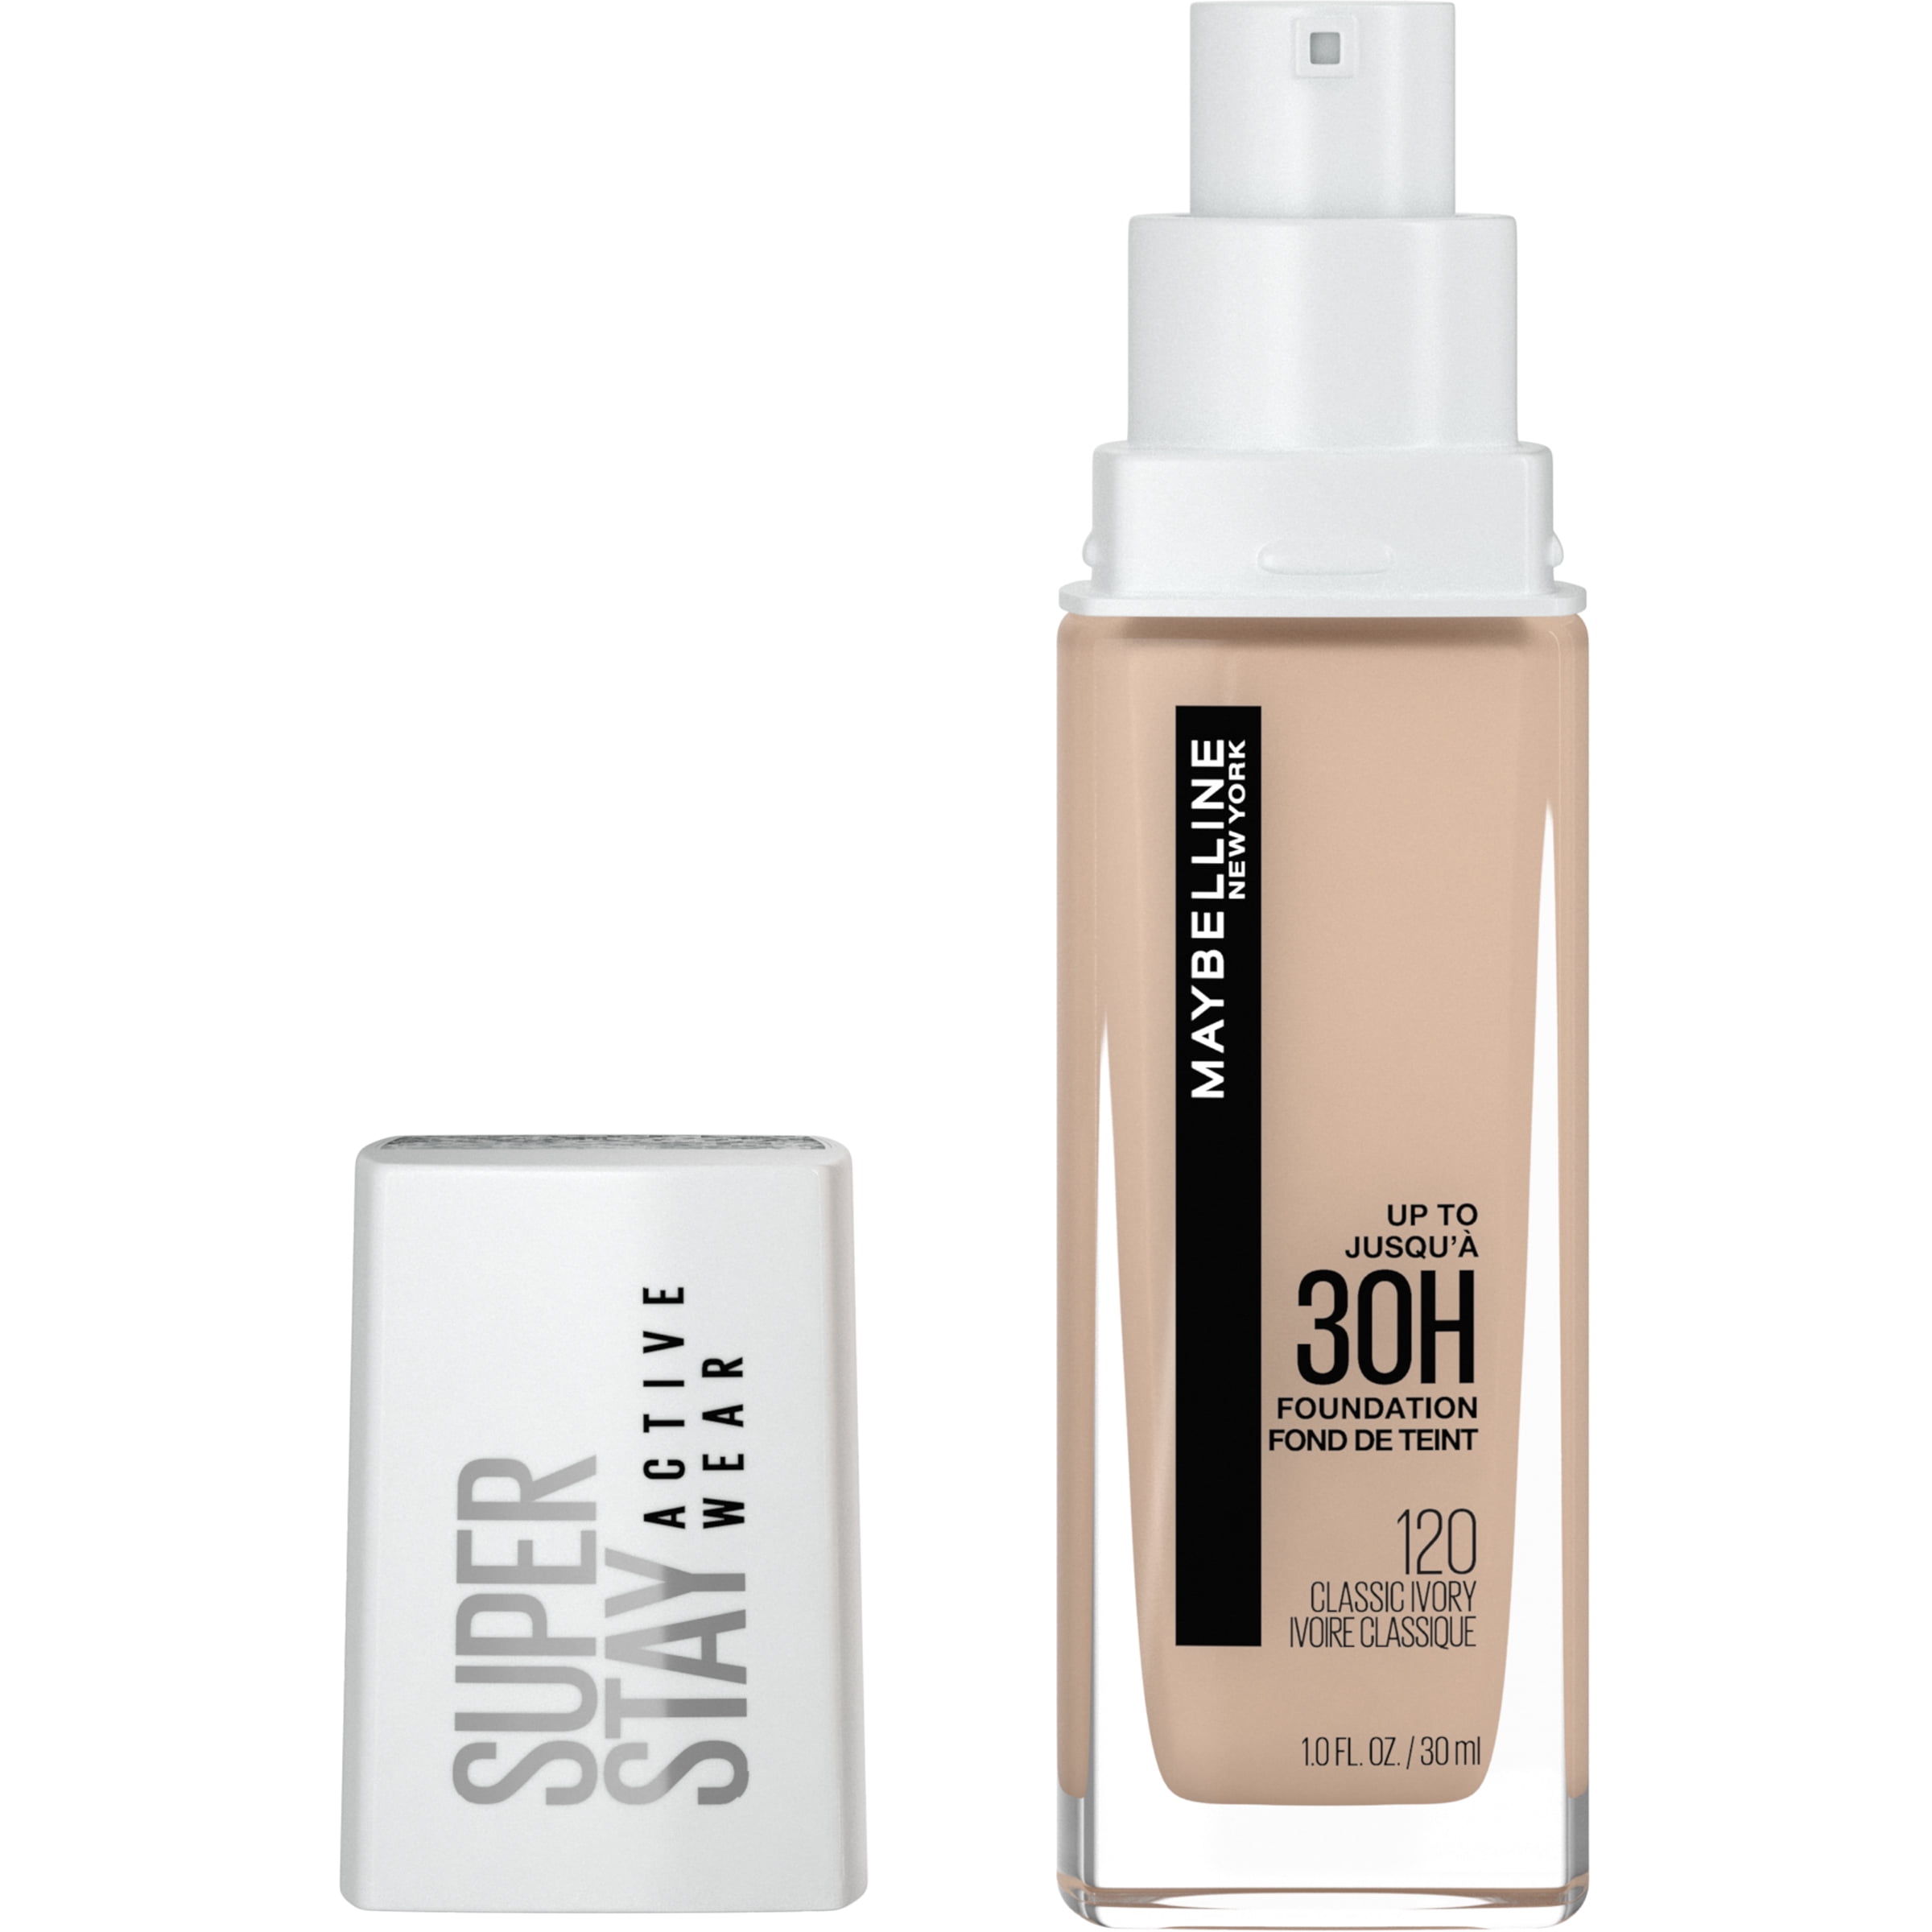 Maybelline Super Stay Full Coverage Liquid Foundation Makeup, Classic Ivory, 1 fl oz